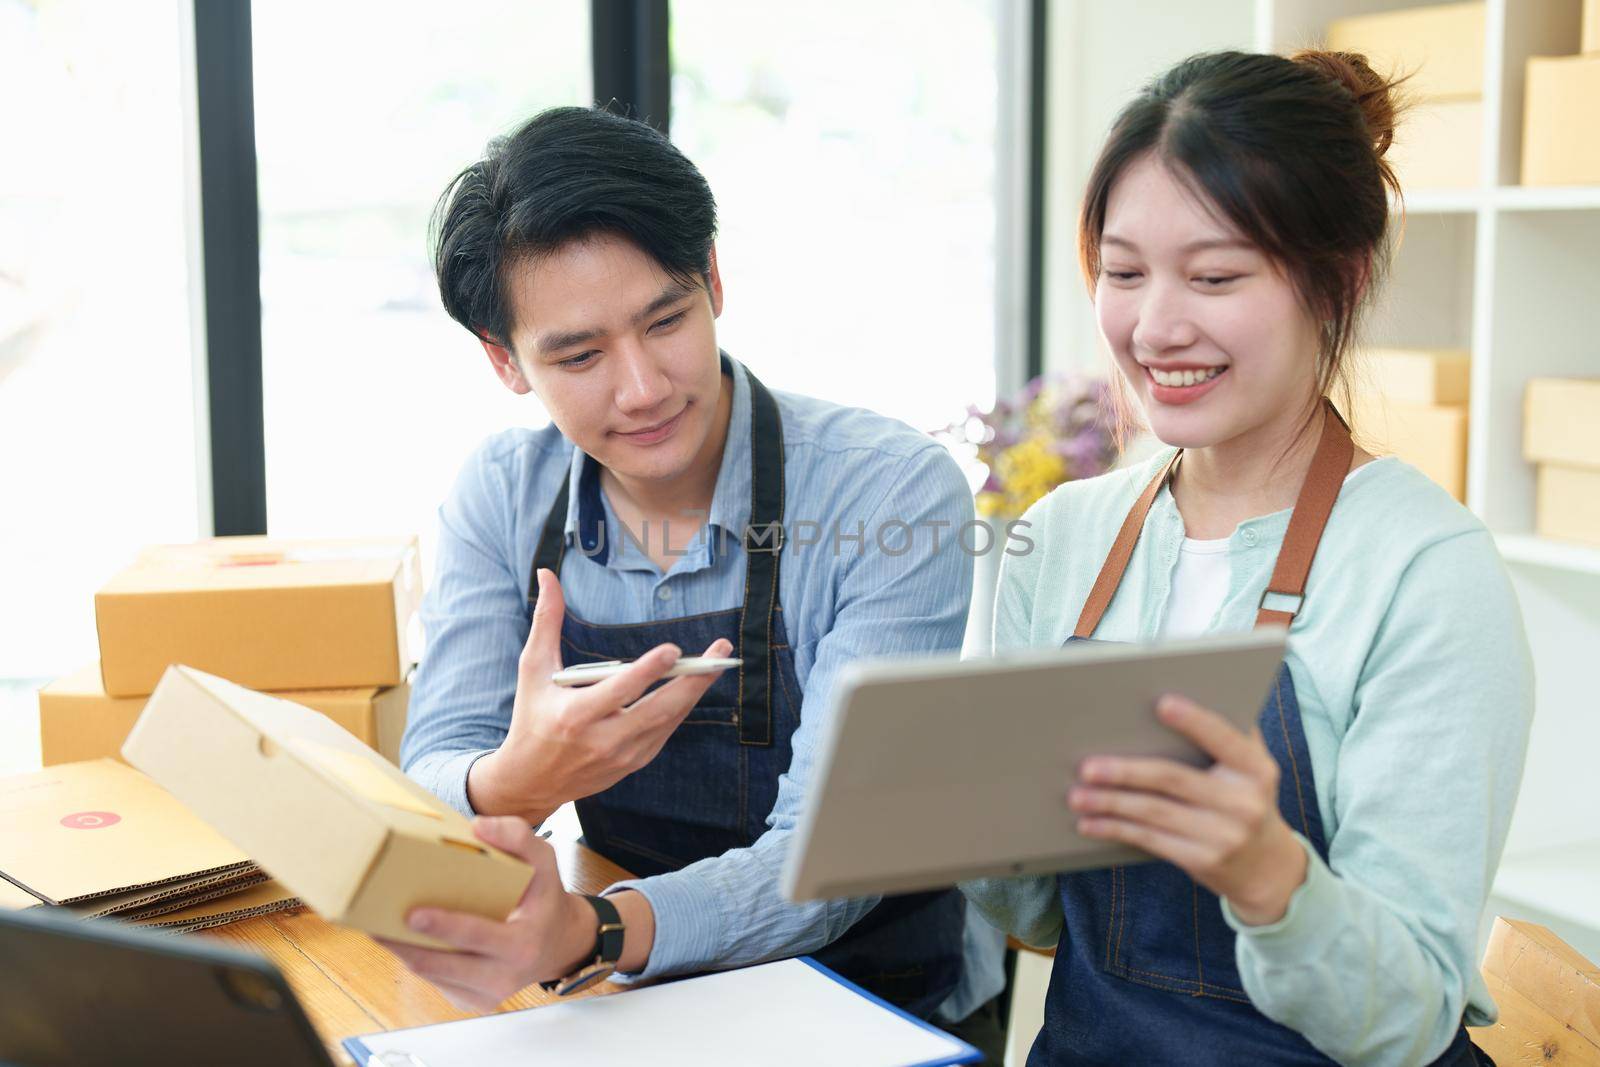 Portrait of a small start-up and SME owner, an Asian male and female entrepreneur checking orders and packing for customers, self-employed, freelance, online selling.